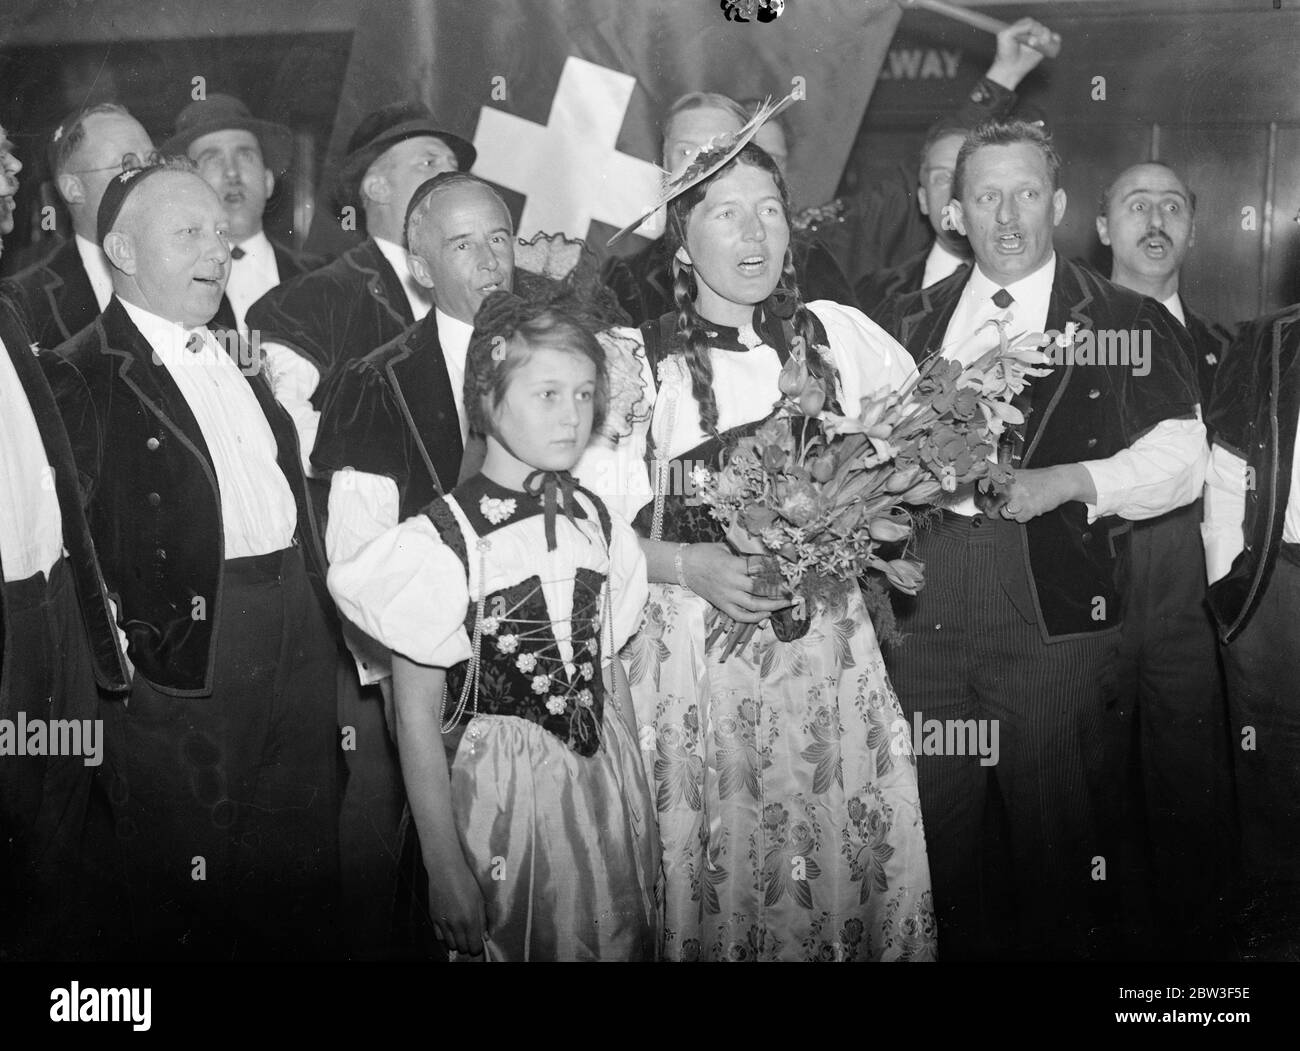 Swiss yodellers arrive in London . To sing at Albert Hall . A party of Swiss Yodellers , dressed in national costume arrived at Victoria STation to sing at the Royal Albert Hall tomorrow ( Saturday ) . They were welcomed by Mr C B Paravicini , the Swiss Minister in London . There were 16 members . Photo shows , members of the choir singing at Victoria on arrival . 6 March 1936 Stock Photo